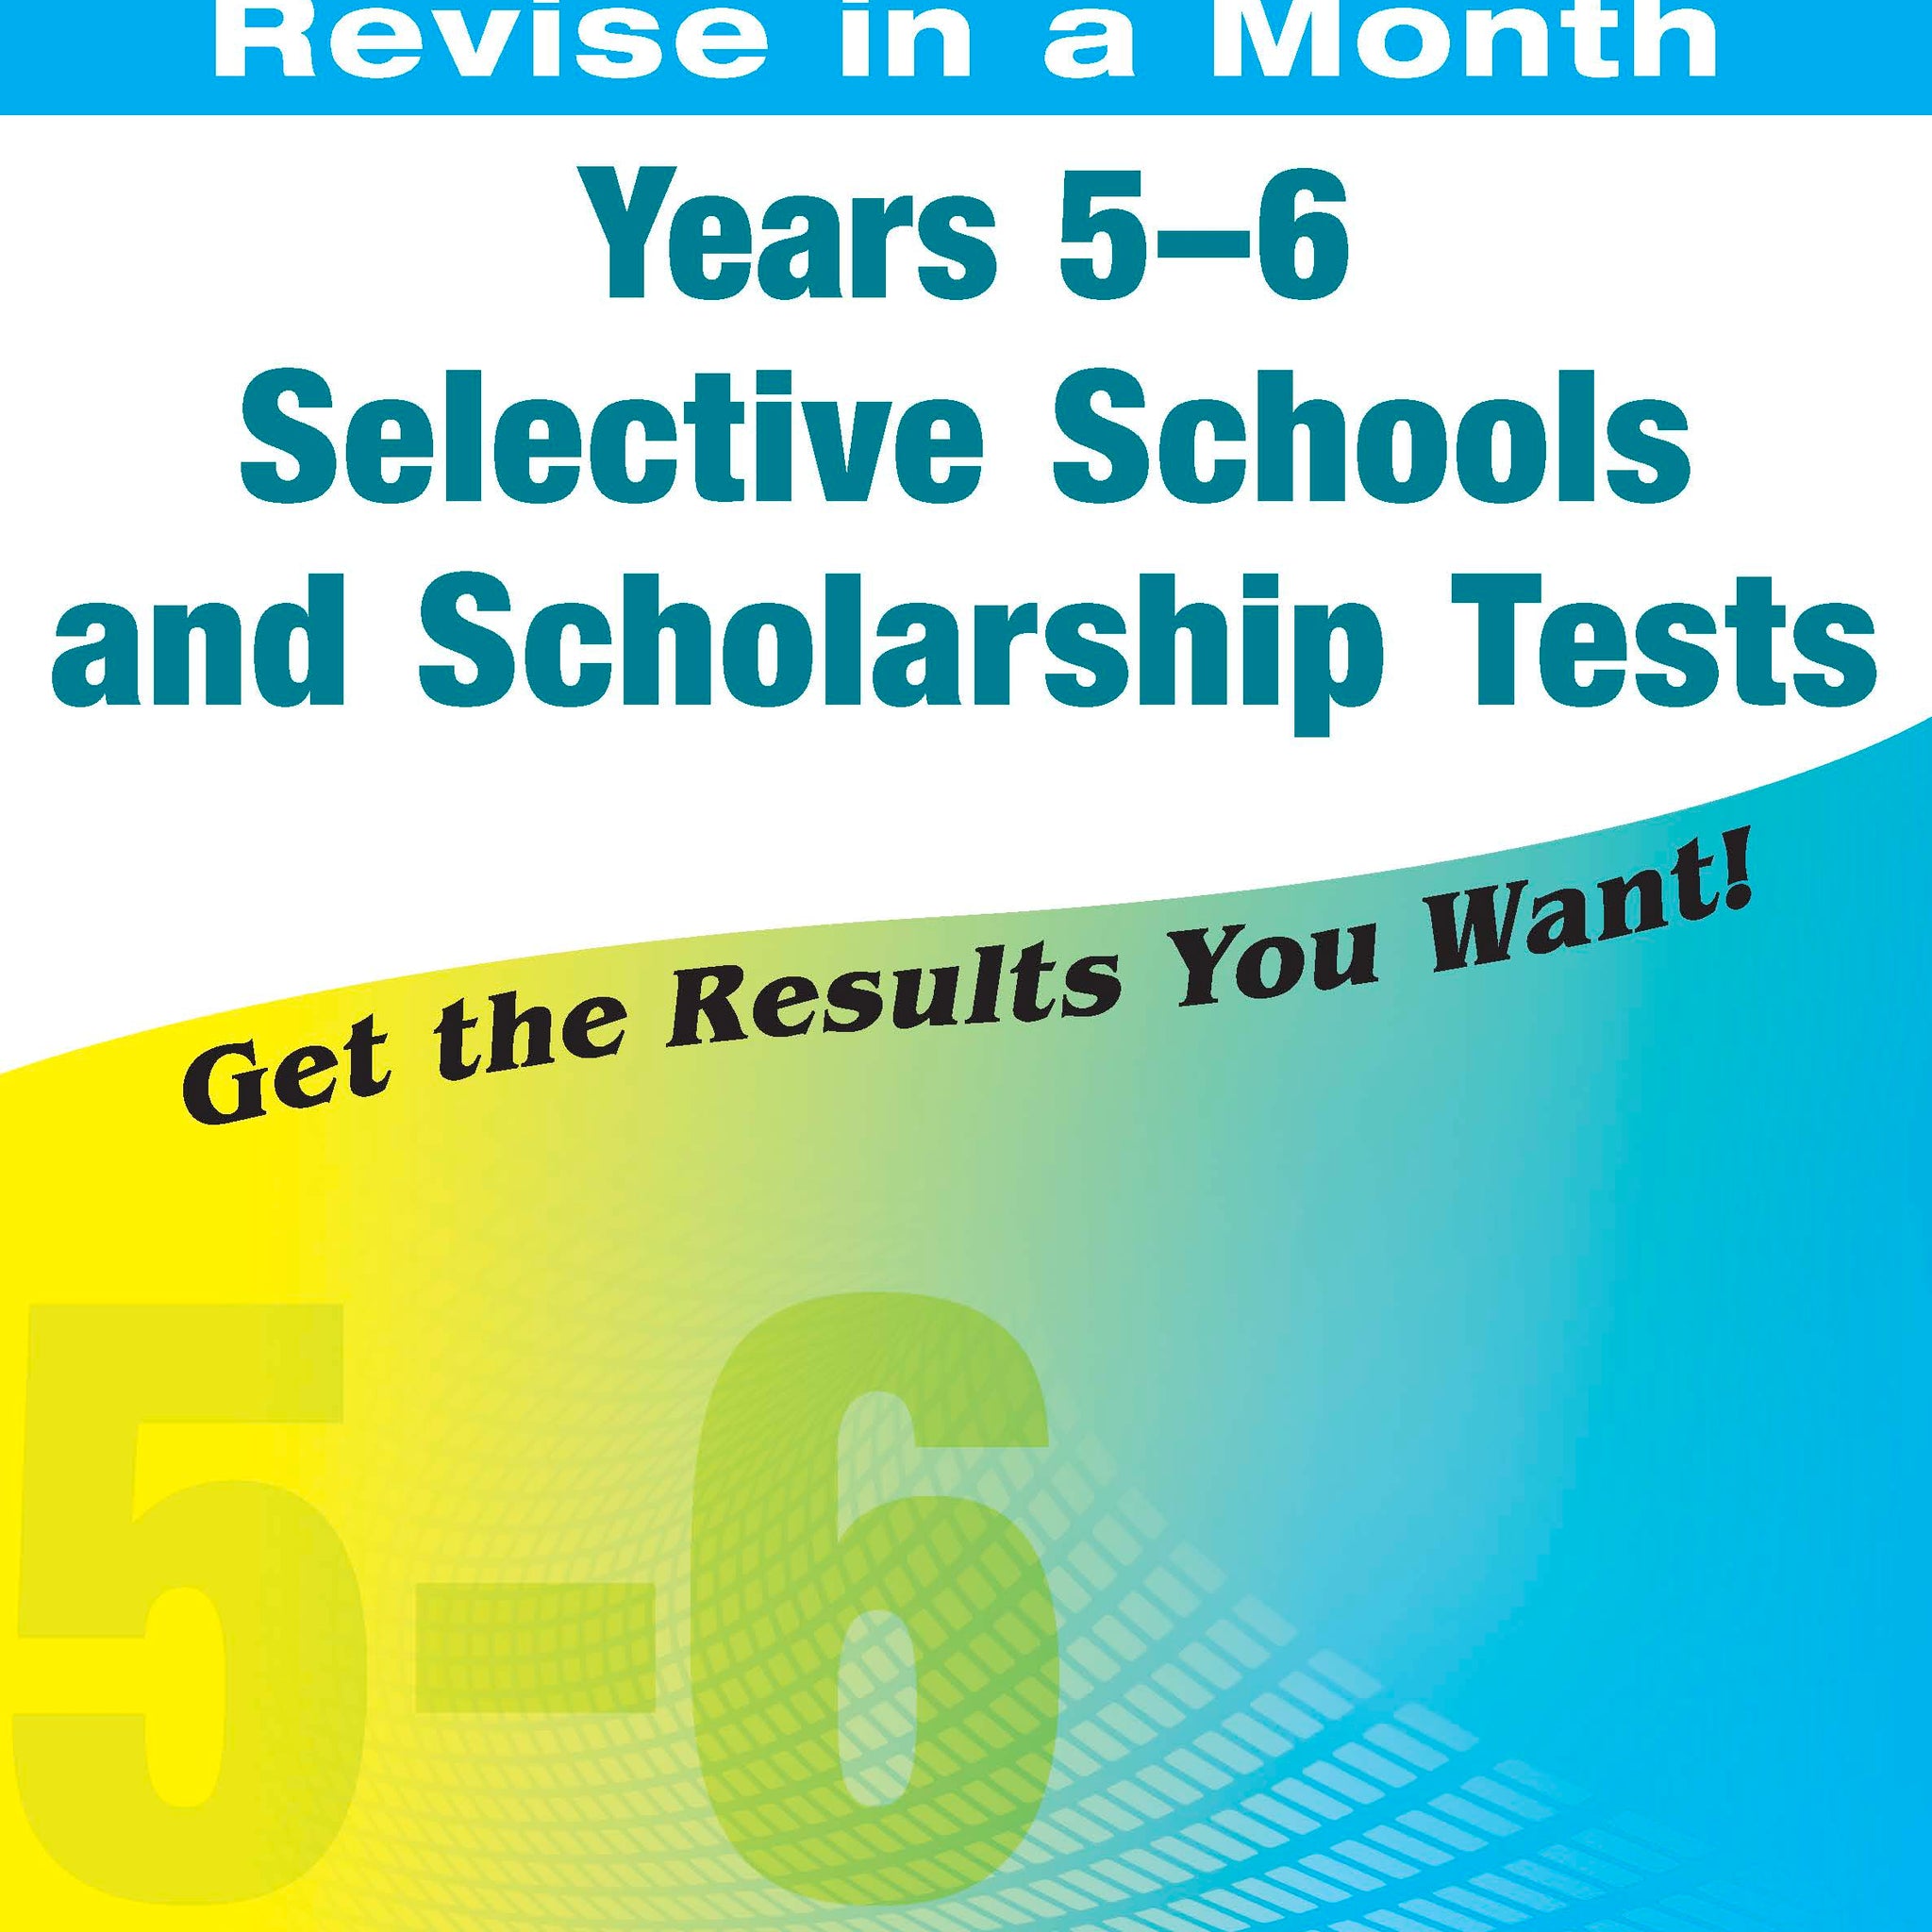 Excel Revise in a Month Selective Schools and Scholarship Tests Years 5-6